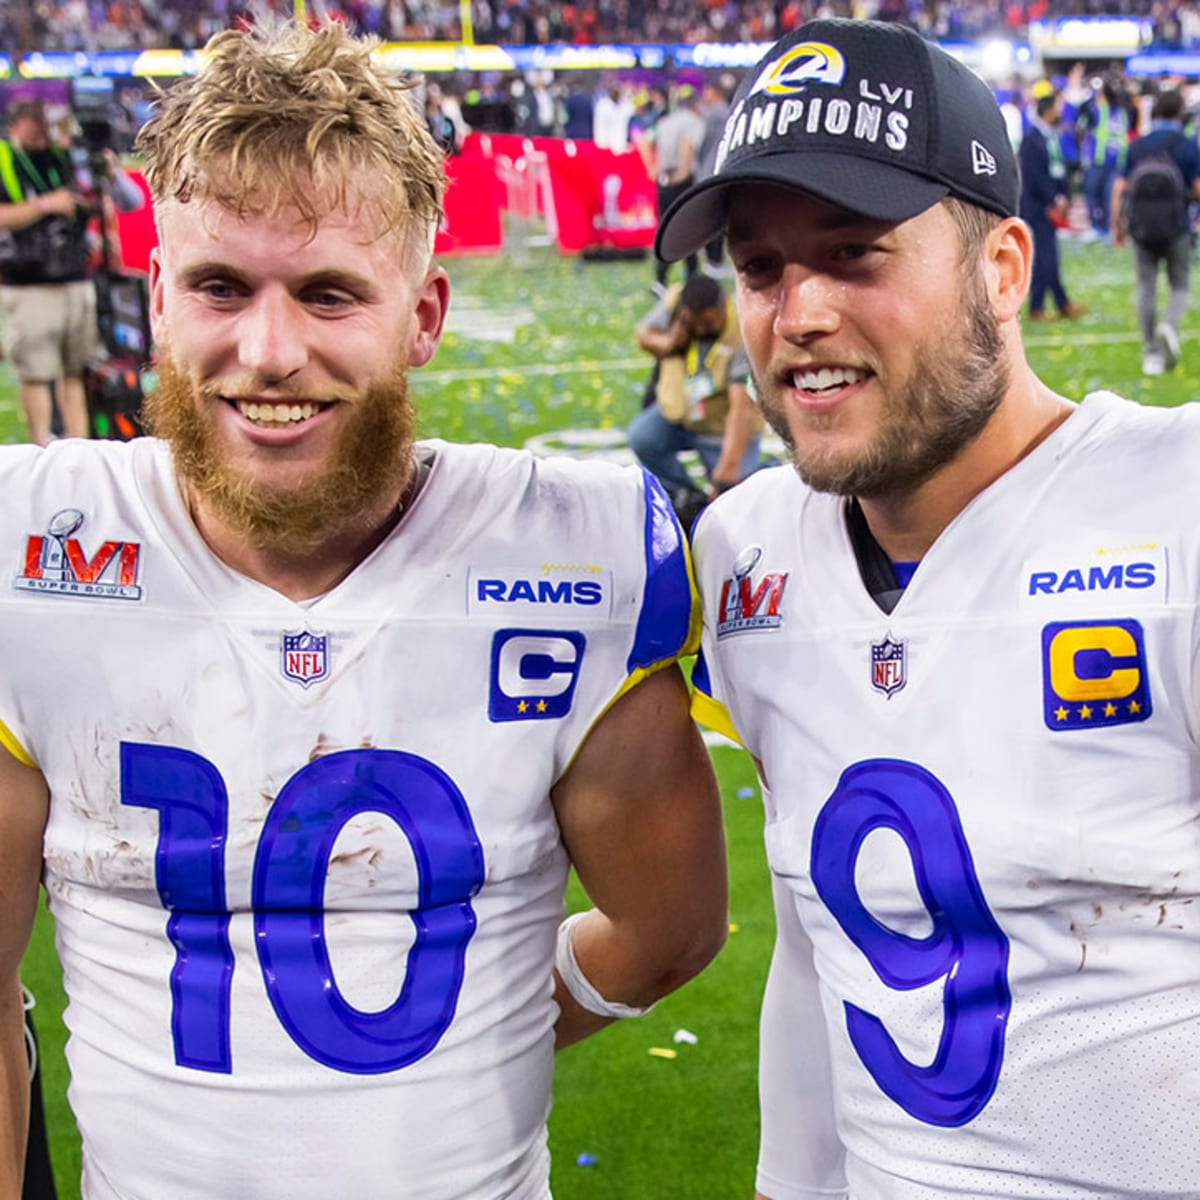 Cooper Kupp: 3-year contract extension the product of those who poured into  him, Rams teammates around him